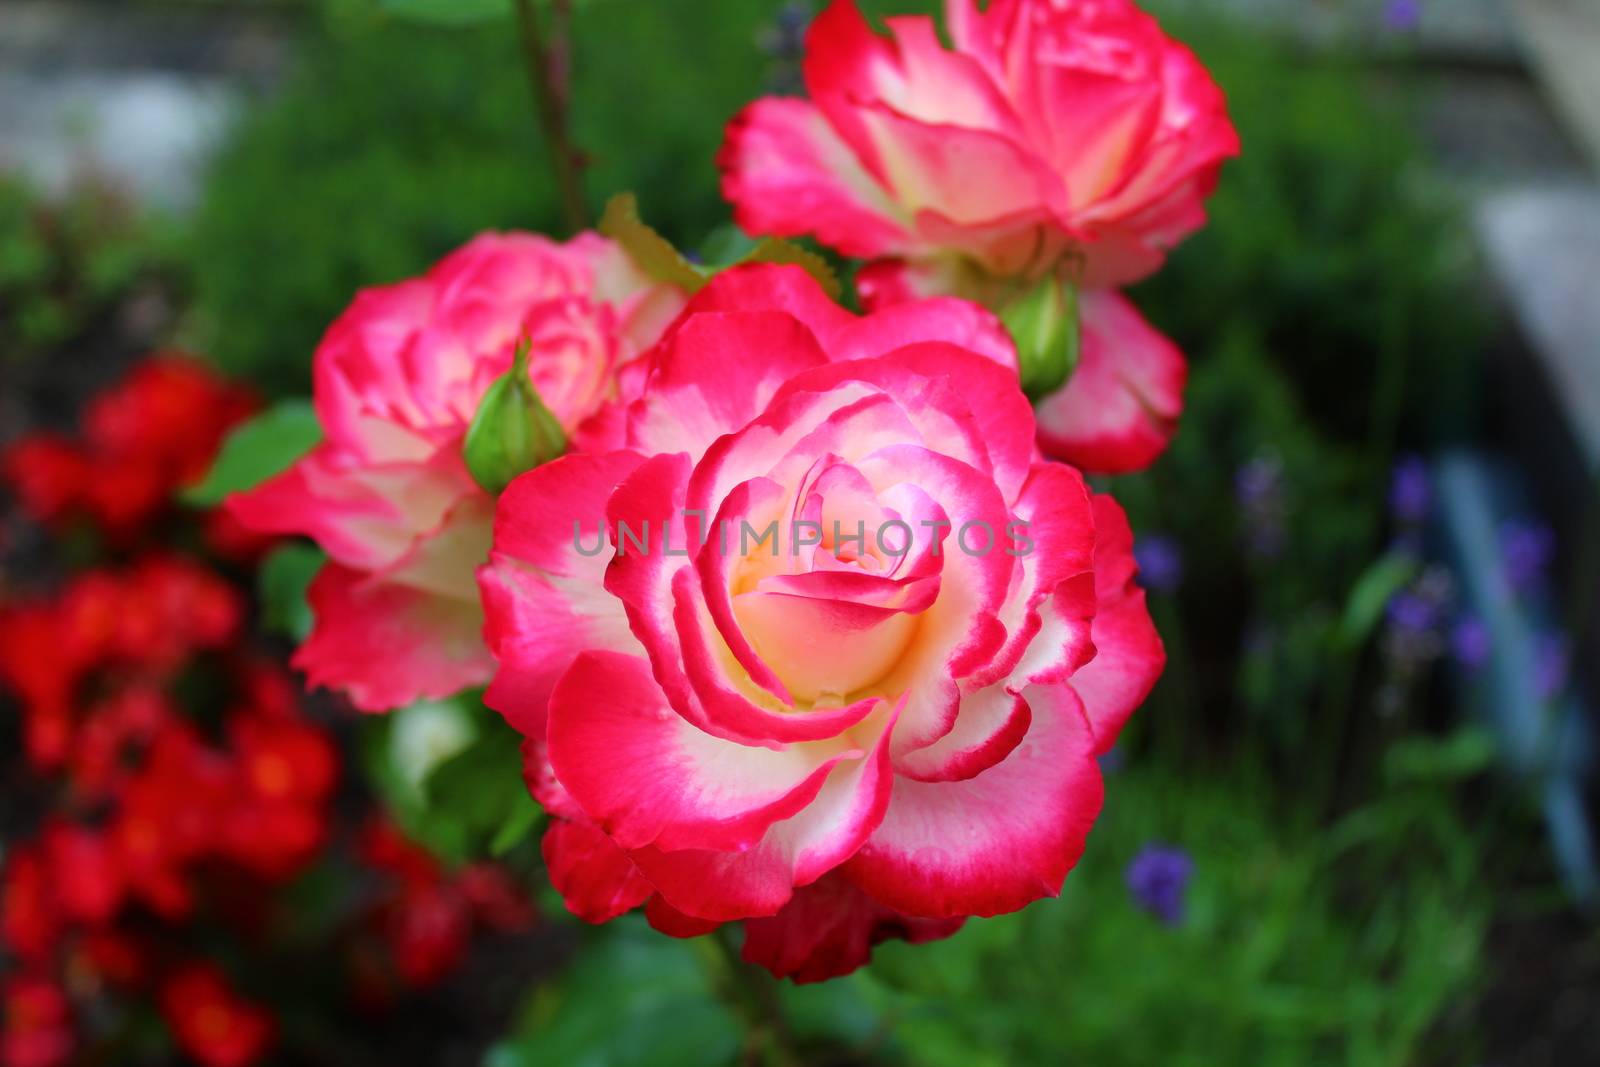 The picture shows a red rose in the garden in the summer